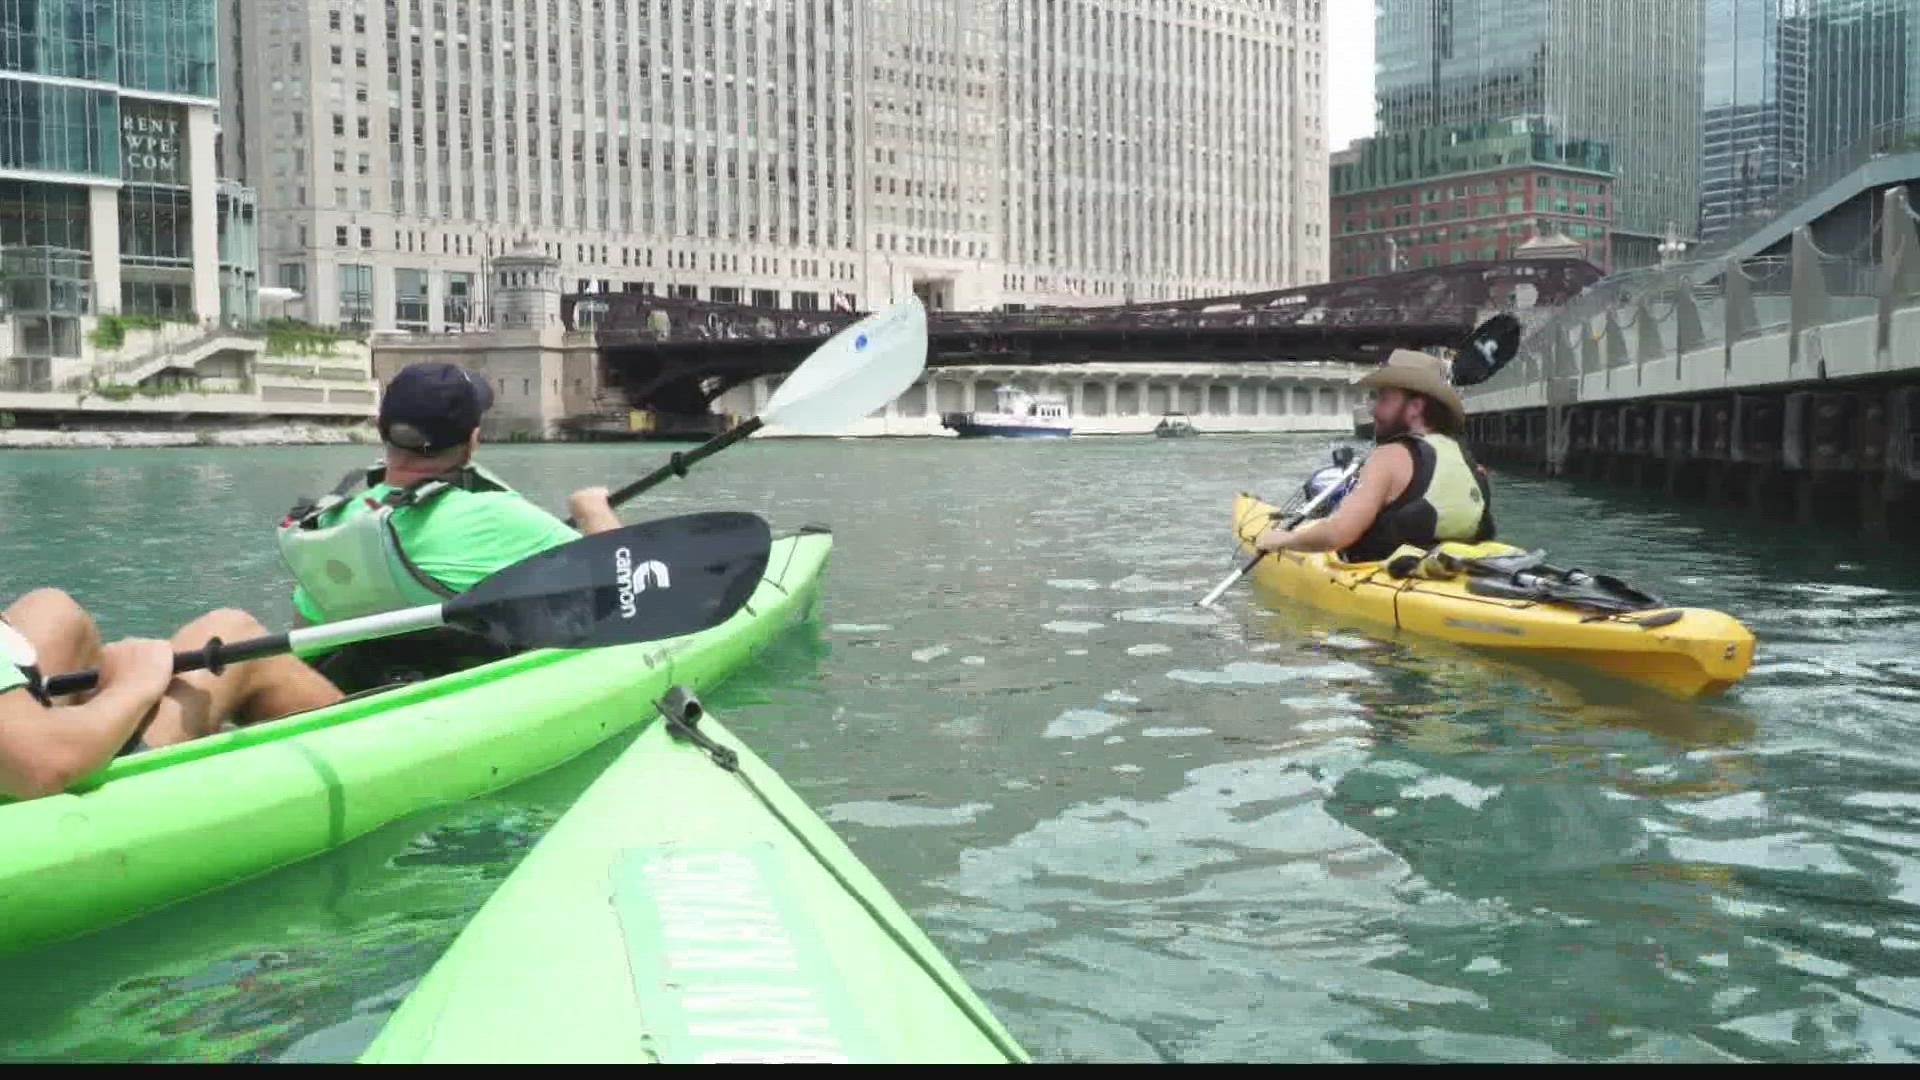 This morning, we're hitting the water as part of Chuck's Big Adventure! The Chicago River is a centerpiece in the city and there's an exciting way to experience it.